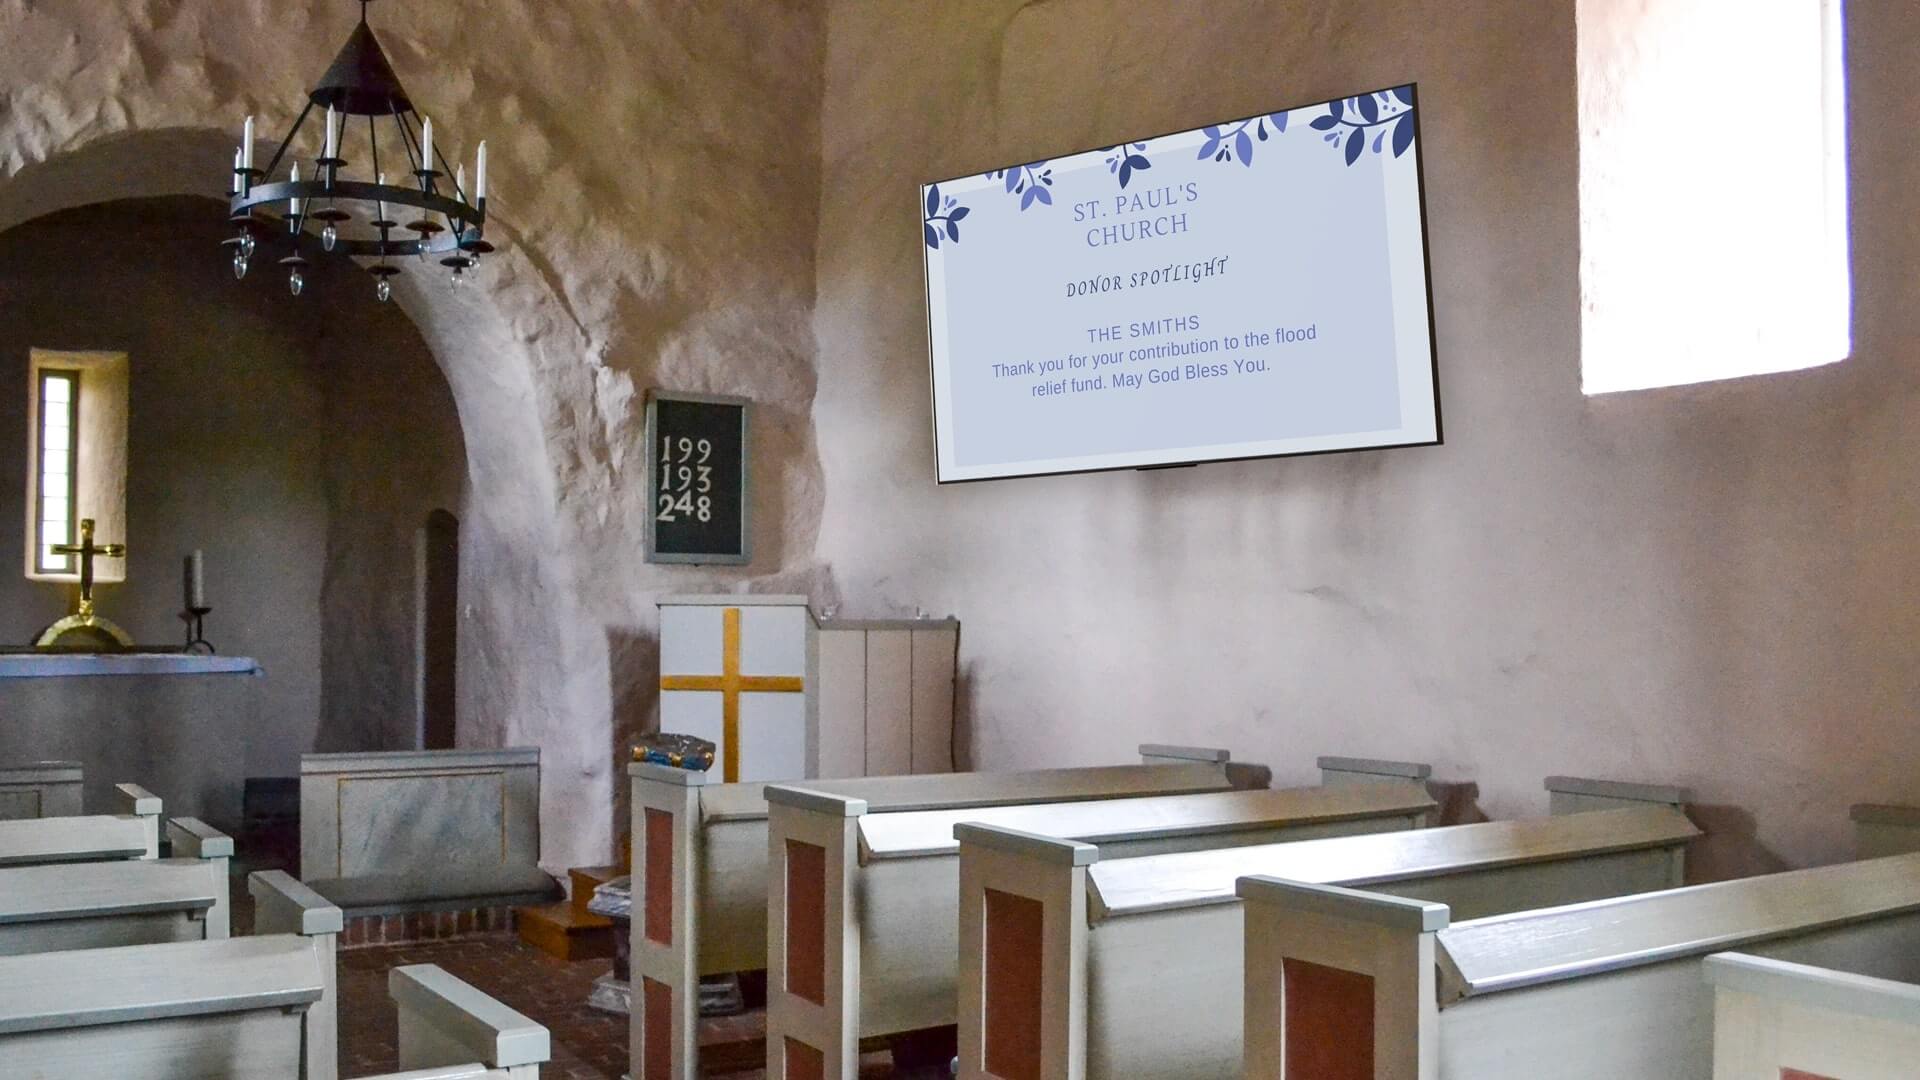 church equipped with digital signage diplay showing fundraising information